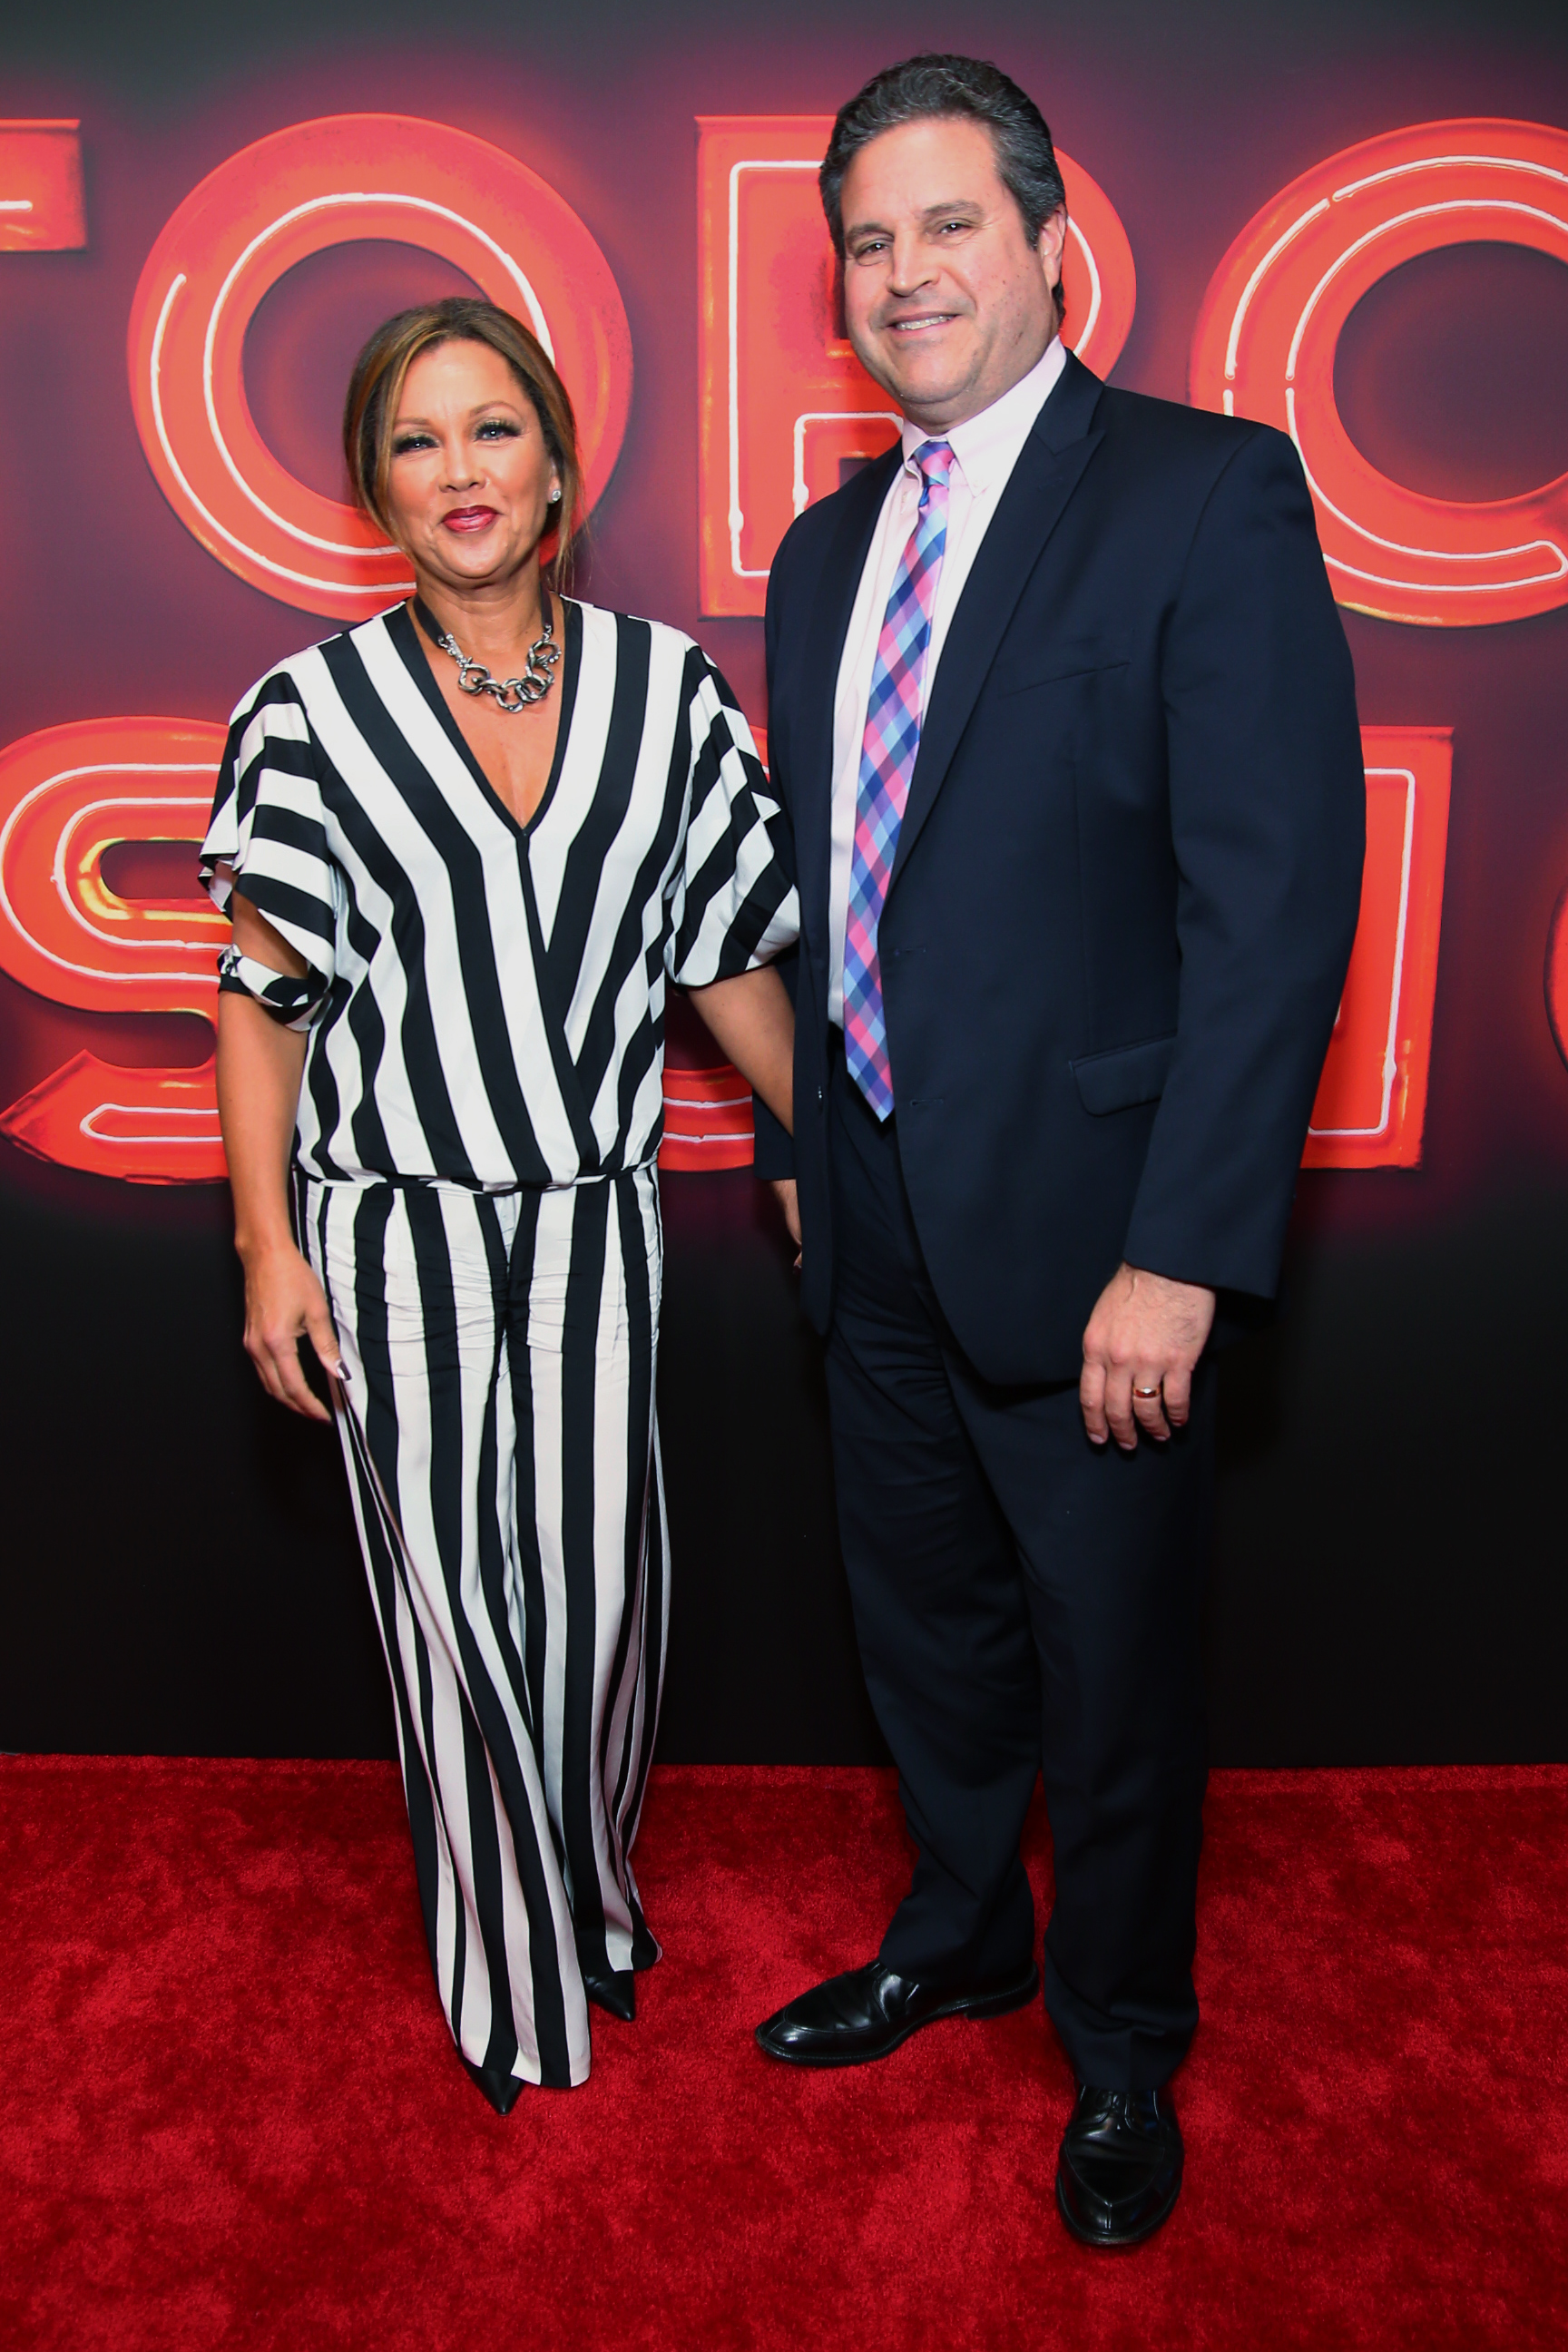 Vanessa Williams and Jim Skrip at the Broadway opening for "Torch Song" in New York City on November 1, 2018 | Source: Getty Images